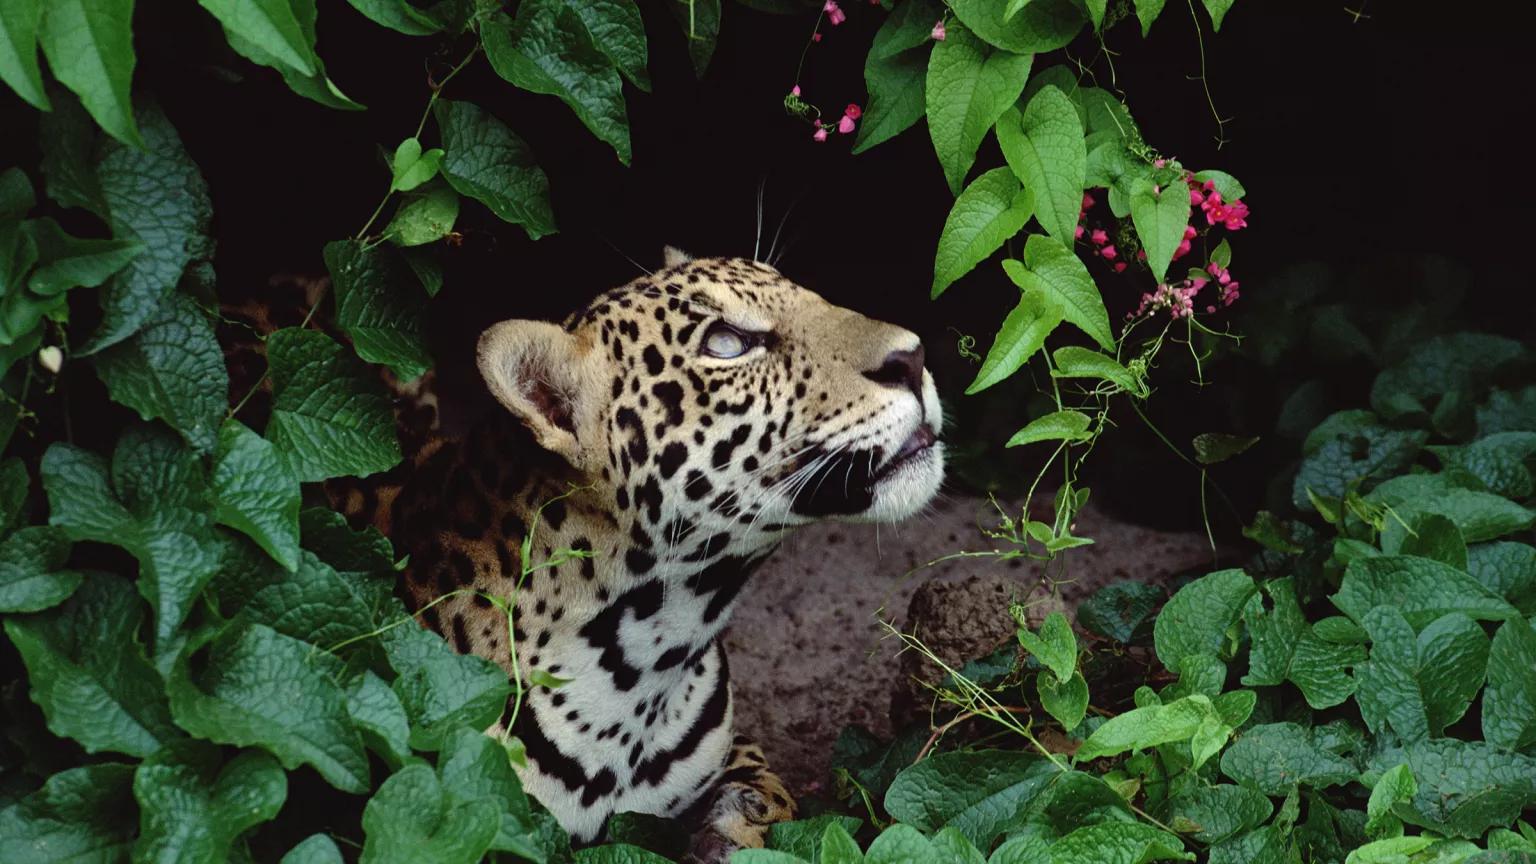 A jaguar looks out from the cover of a leafy tree